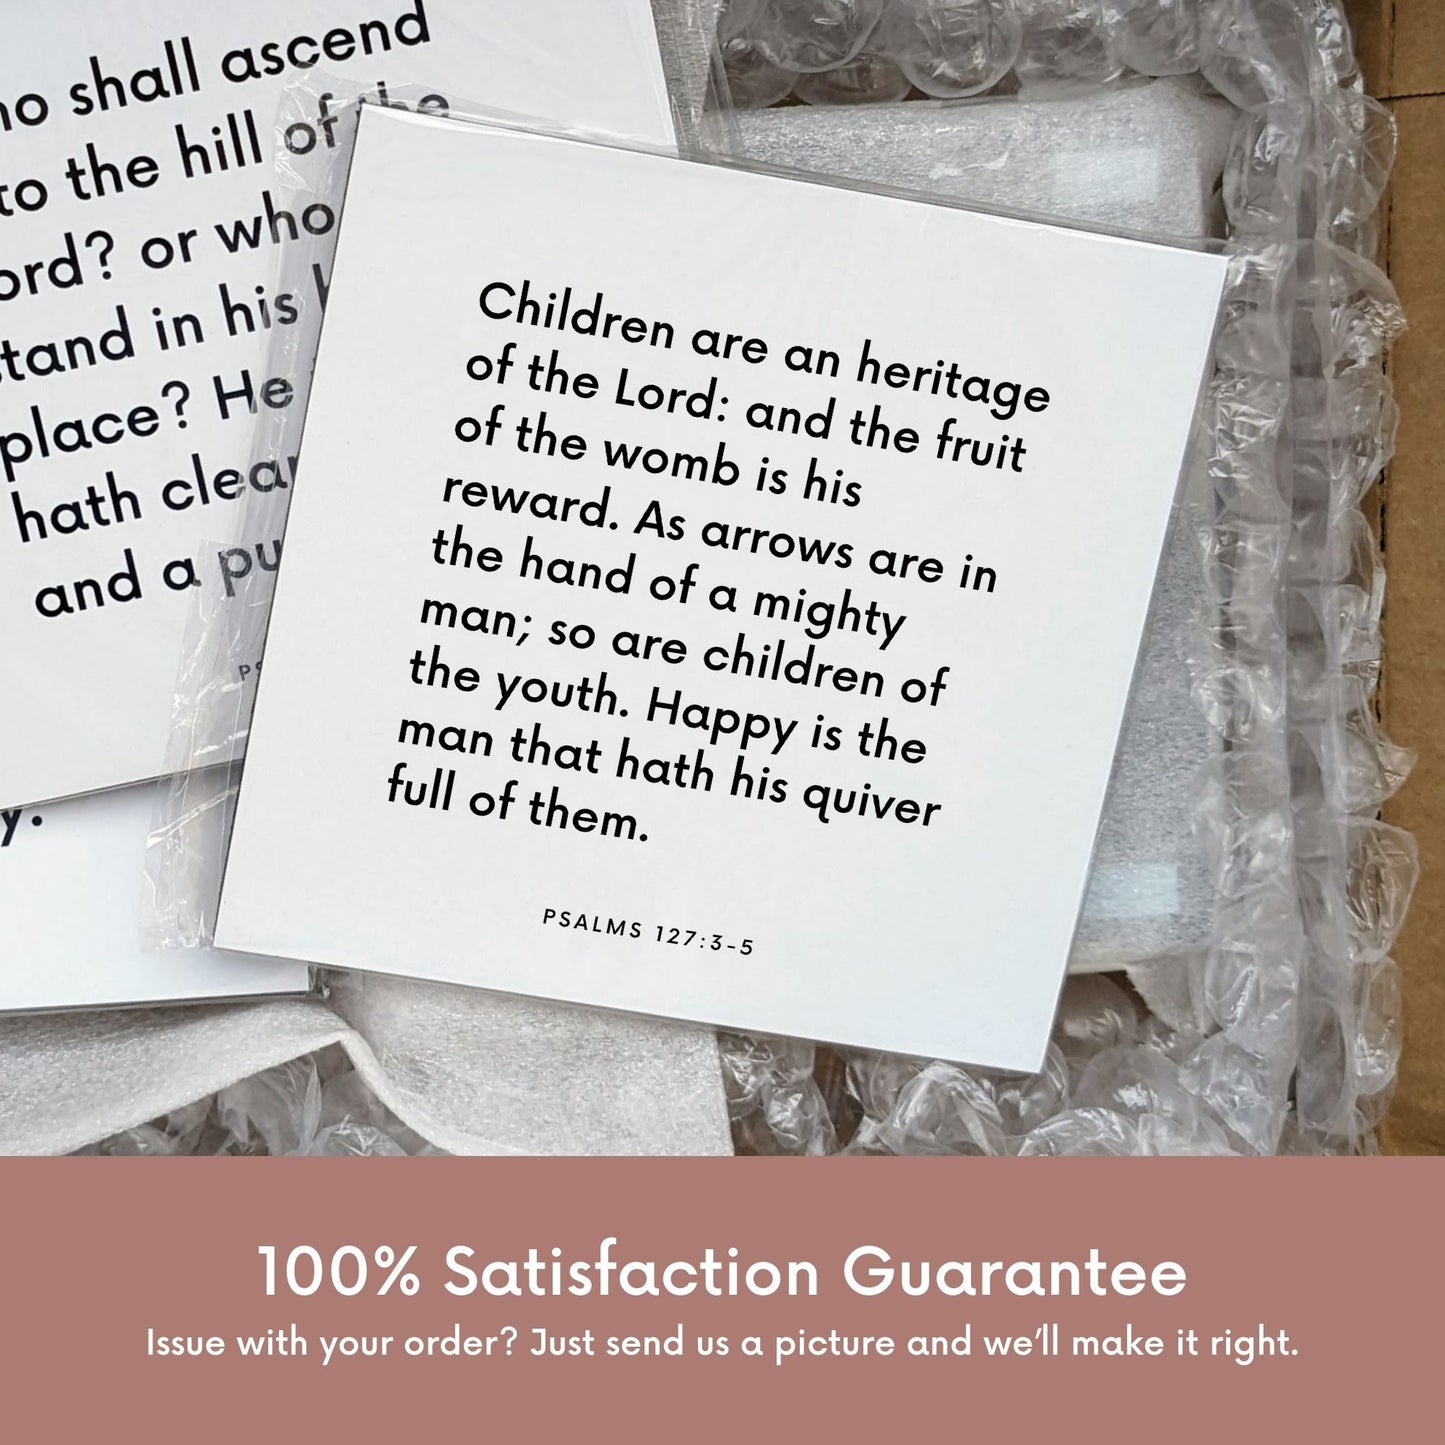 Shipping materials for scripture tile of Psalms 127:3-5 - "Children are an heritage of the Lord"